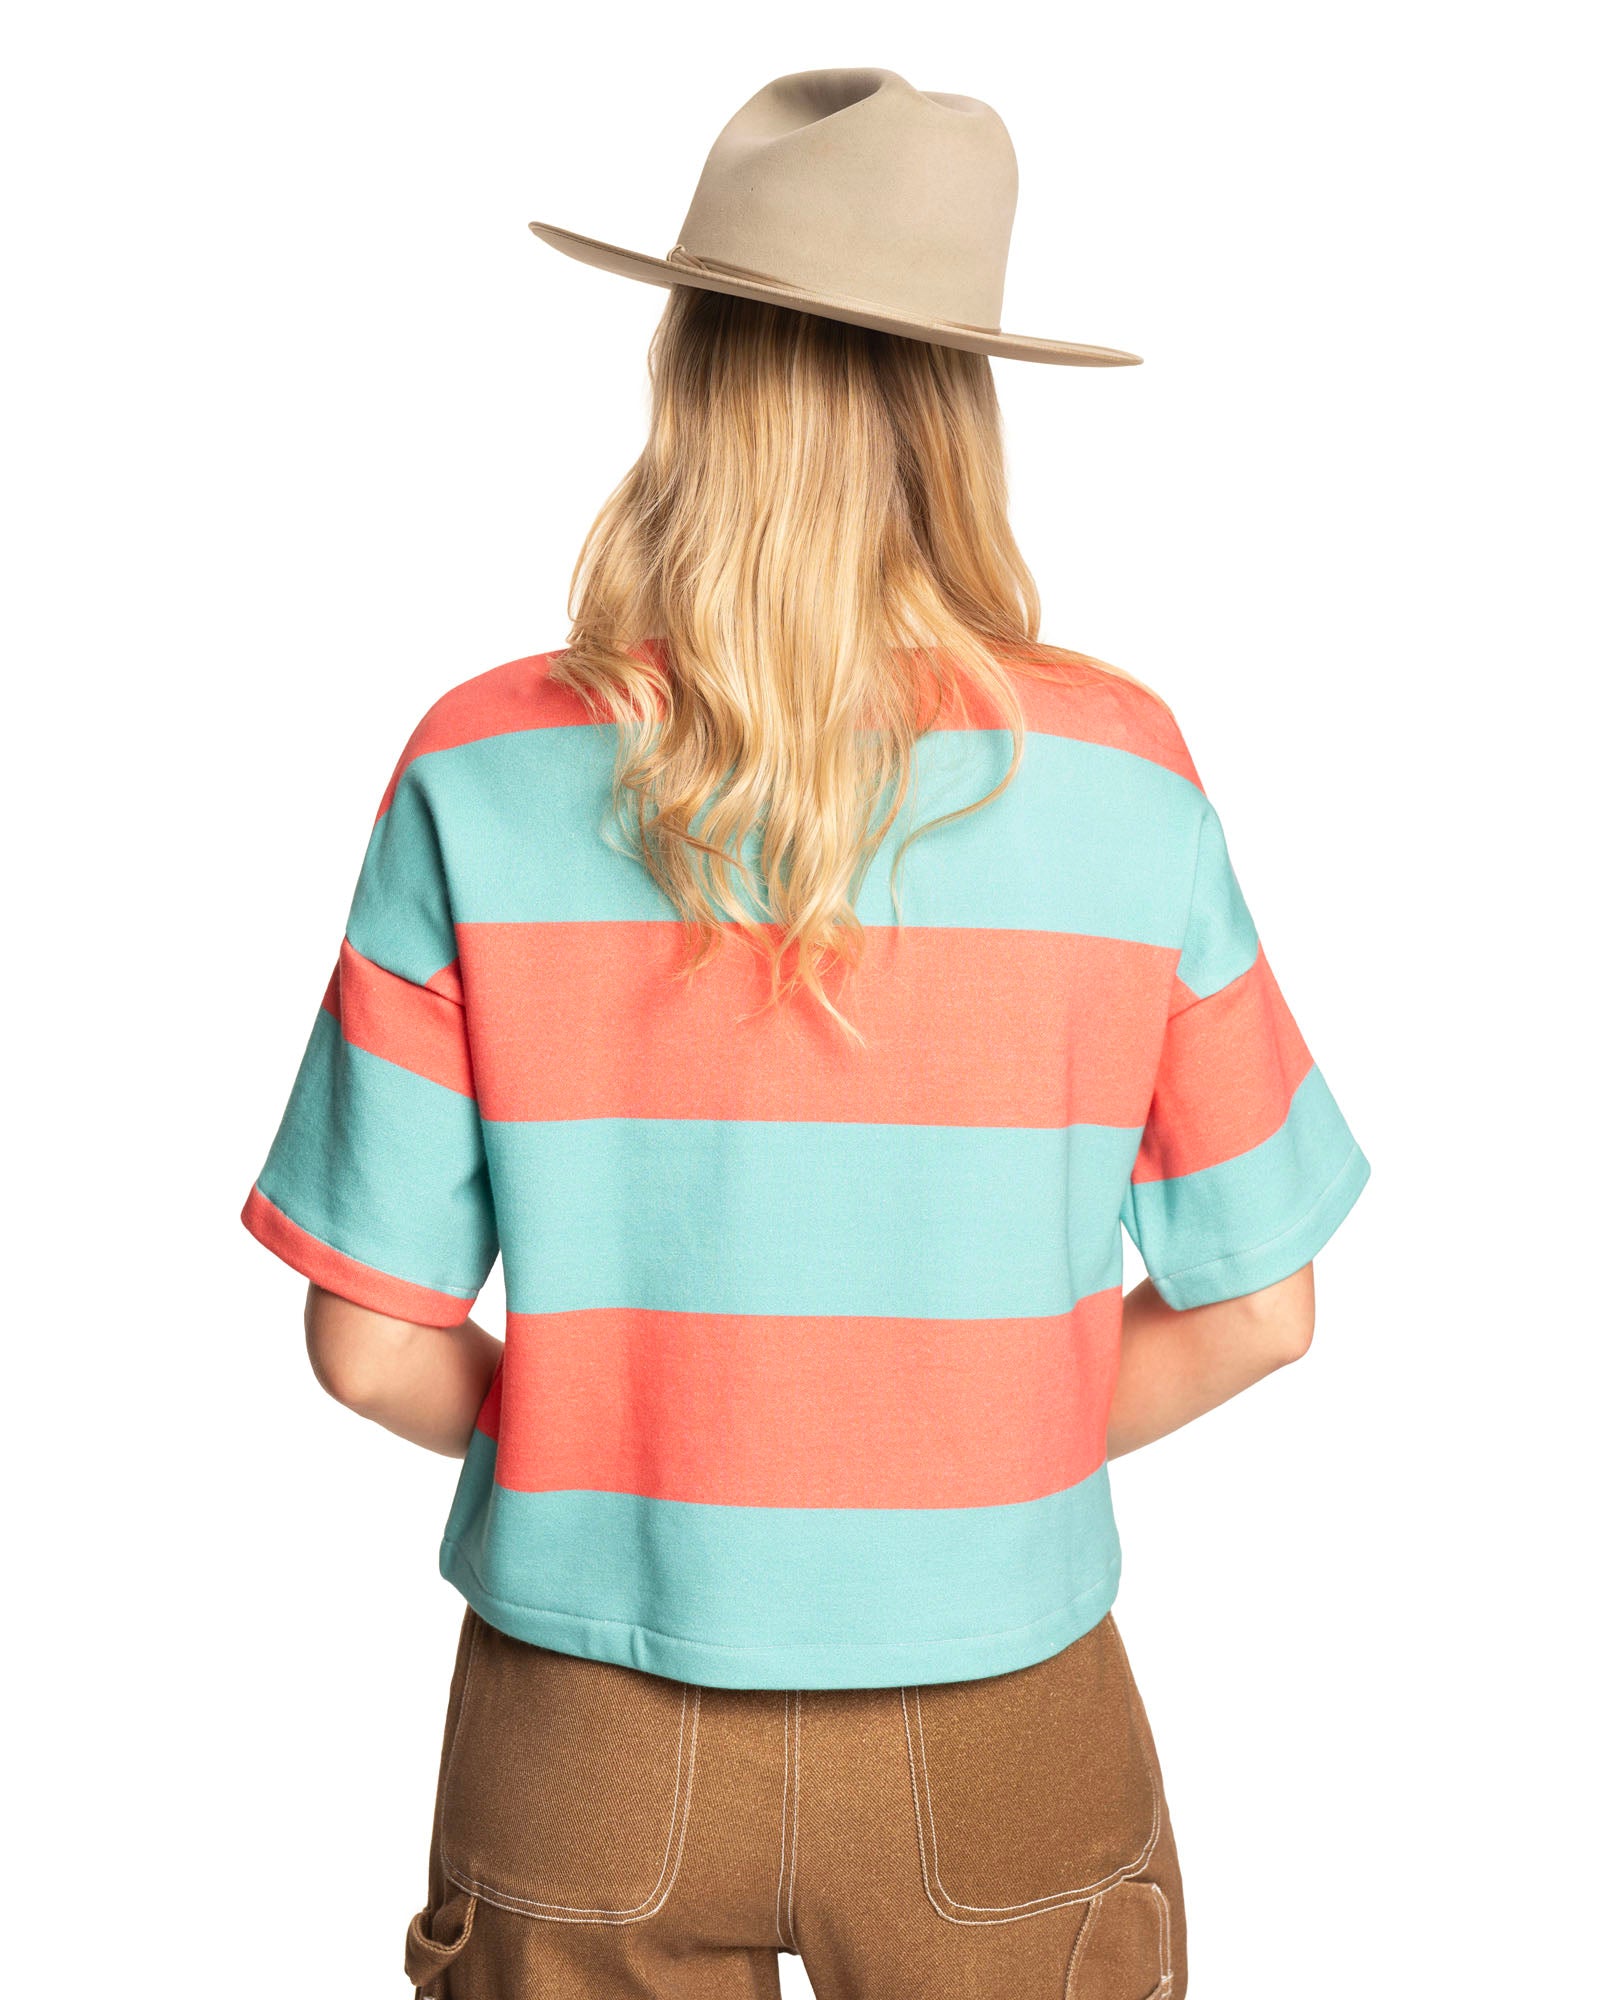 Rugby Shirt | Cotton Candy Stripe